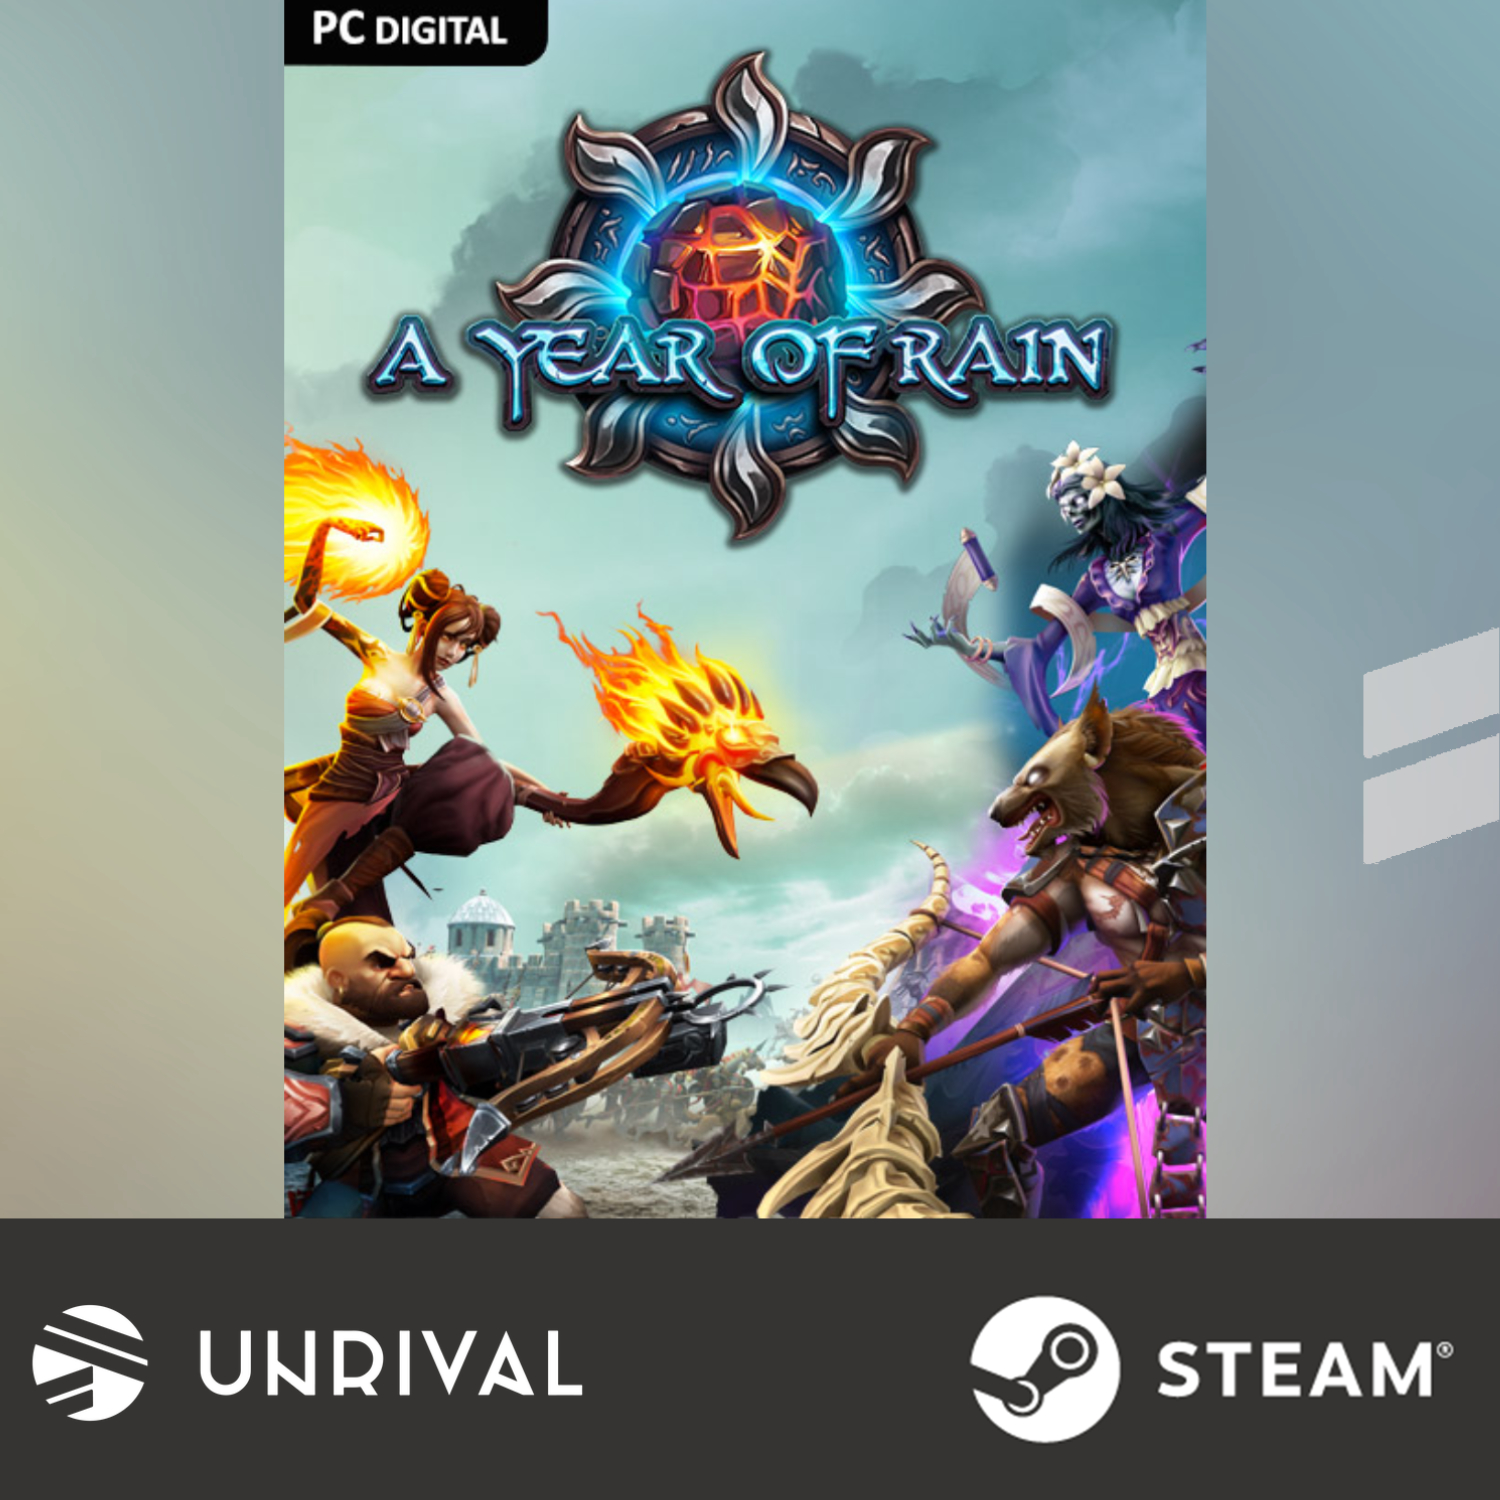 [Hot Sale] A Year Of Rain PC Digital Download Game (Multiplayer) - Unrival